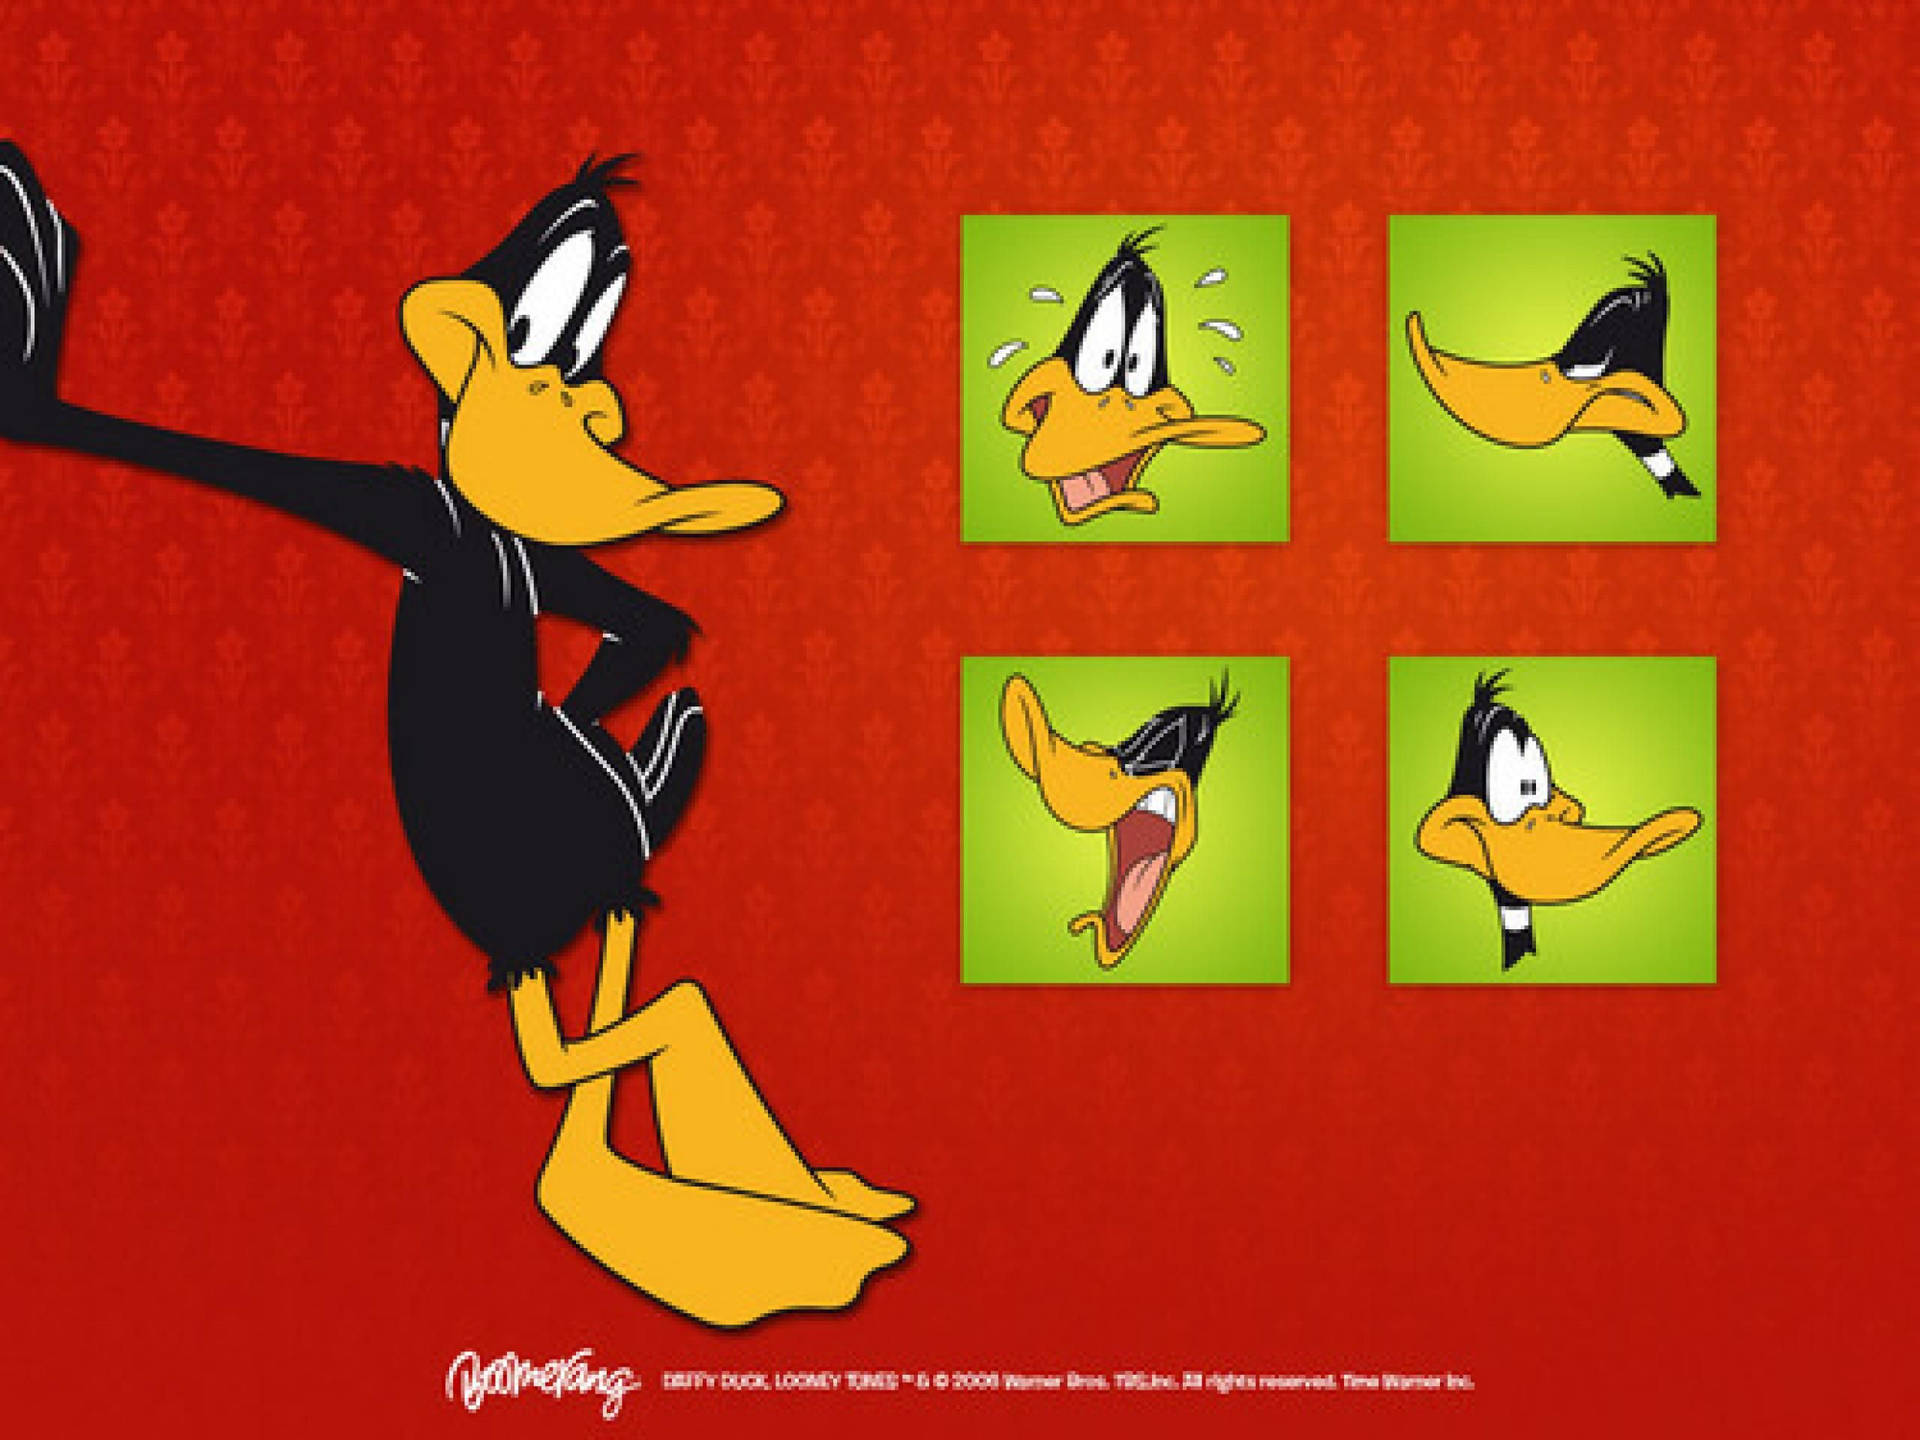 Free Daffy Duck Wallpaper Downloads, [100+] Daffy Duck Wallpapers for FREE  